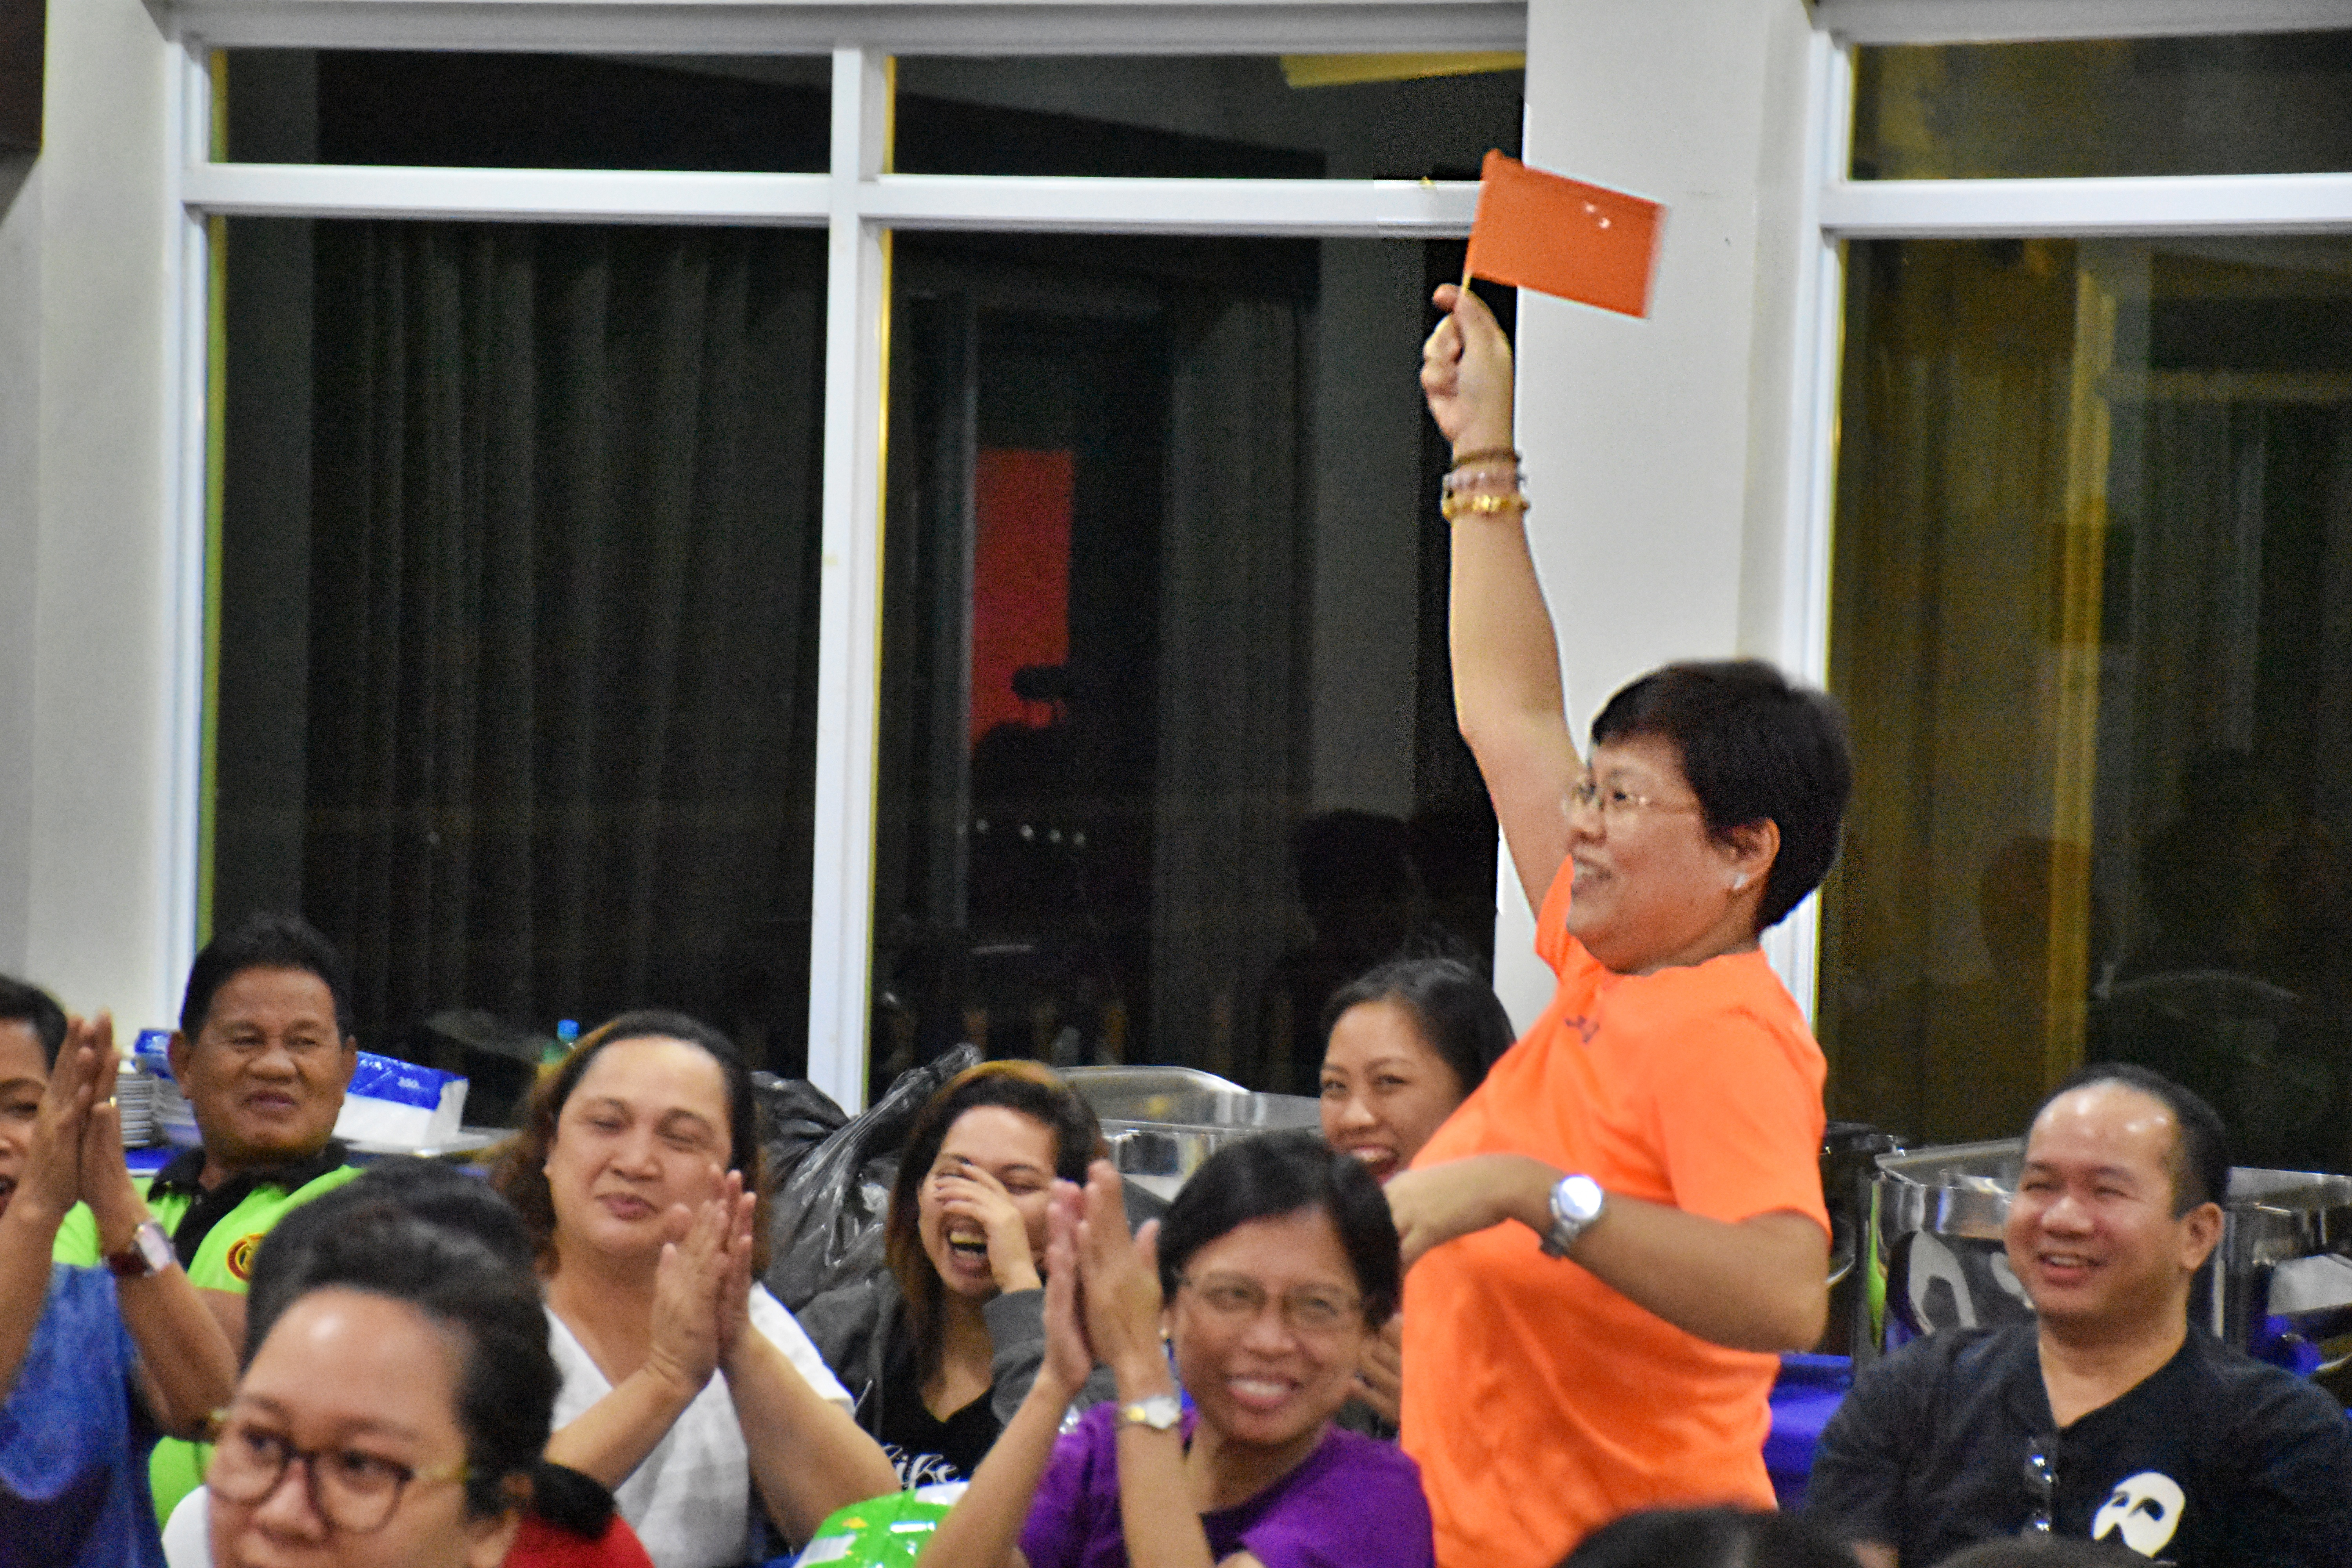 GEC Director Dr. Oyzon brightens up the competition with her sunny orange enthusiasm